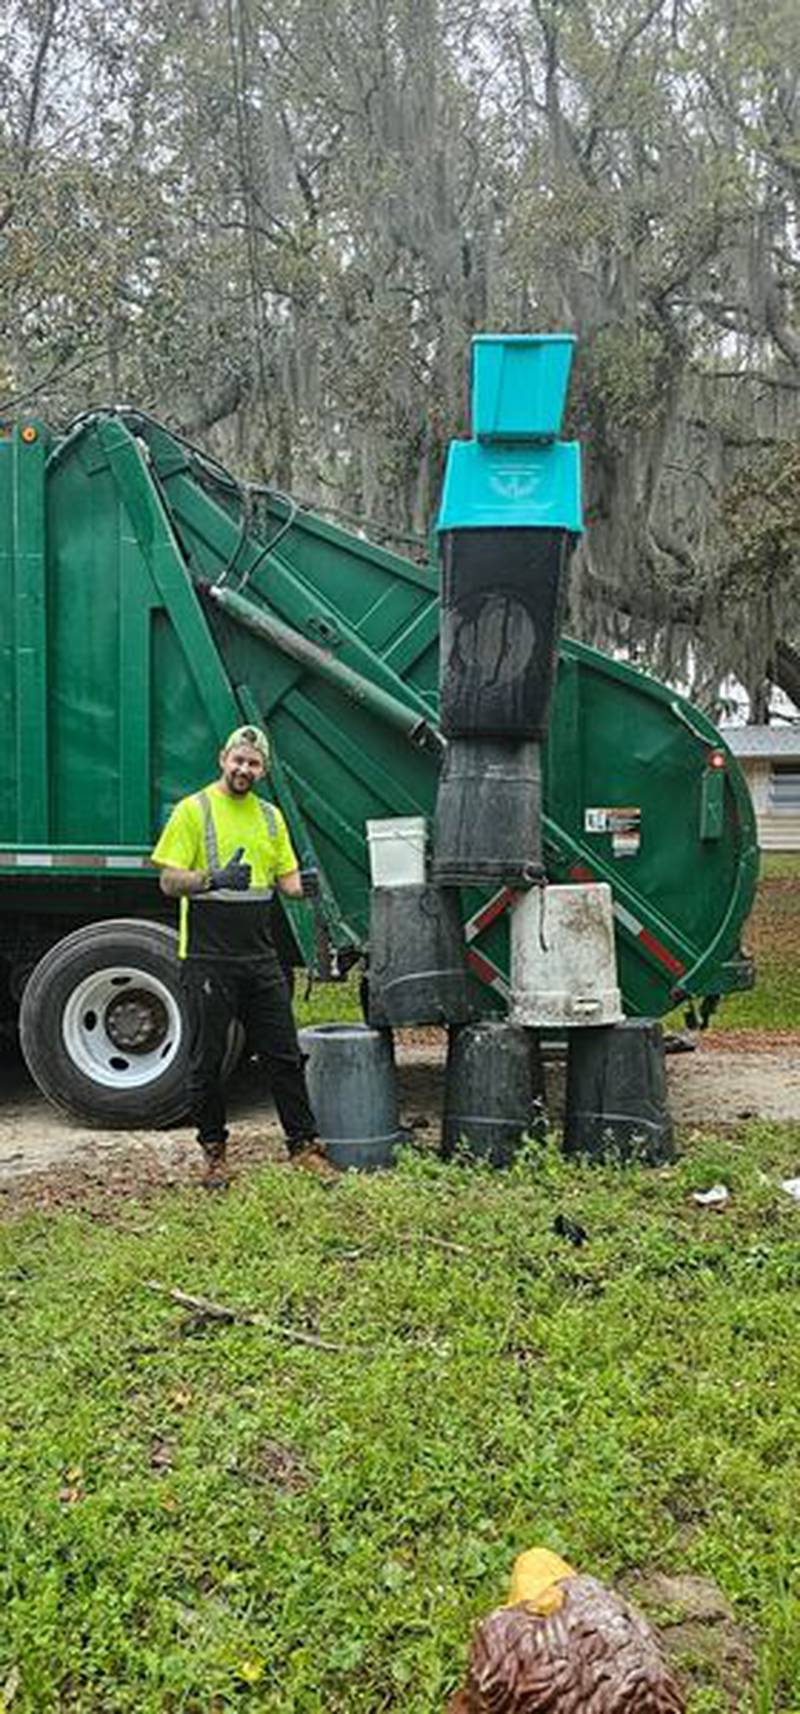 Sams has been playing what she calls “trash can Jenga” with her garbage collectors since the start of March, after coming home one day to find her trash cans stacked into a tower.